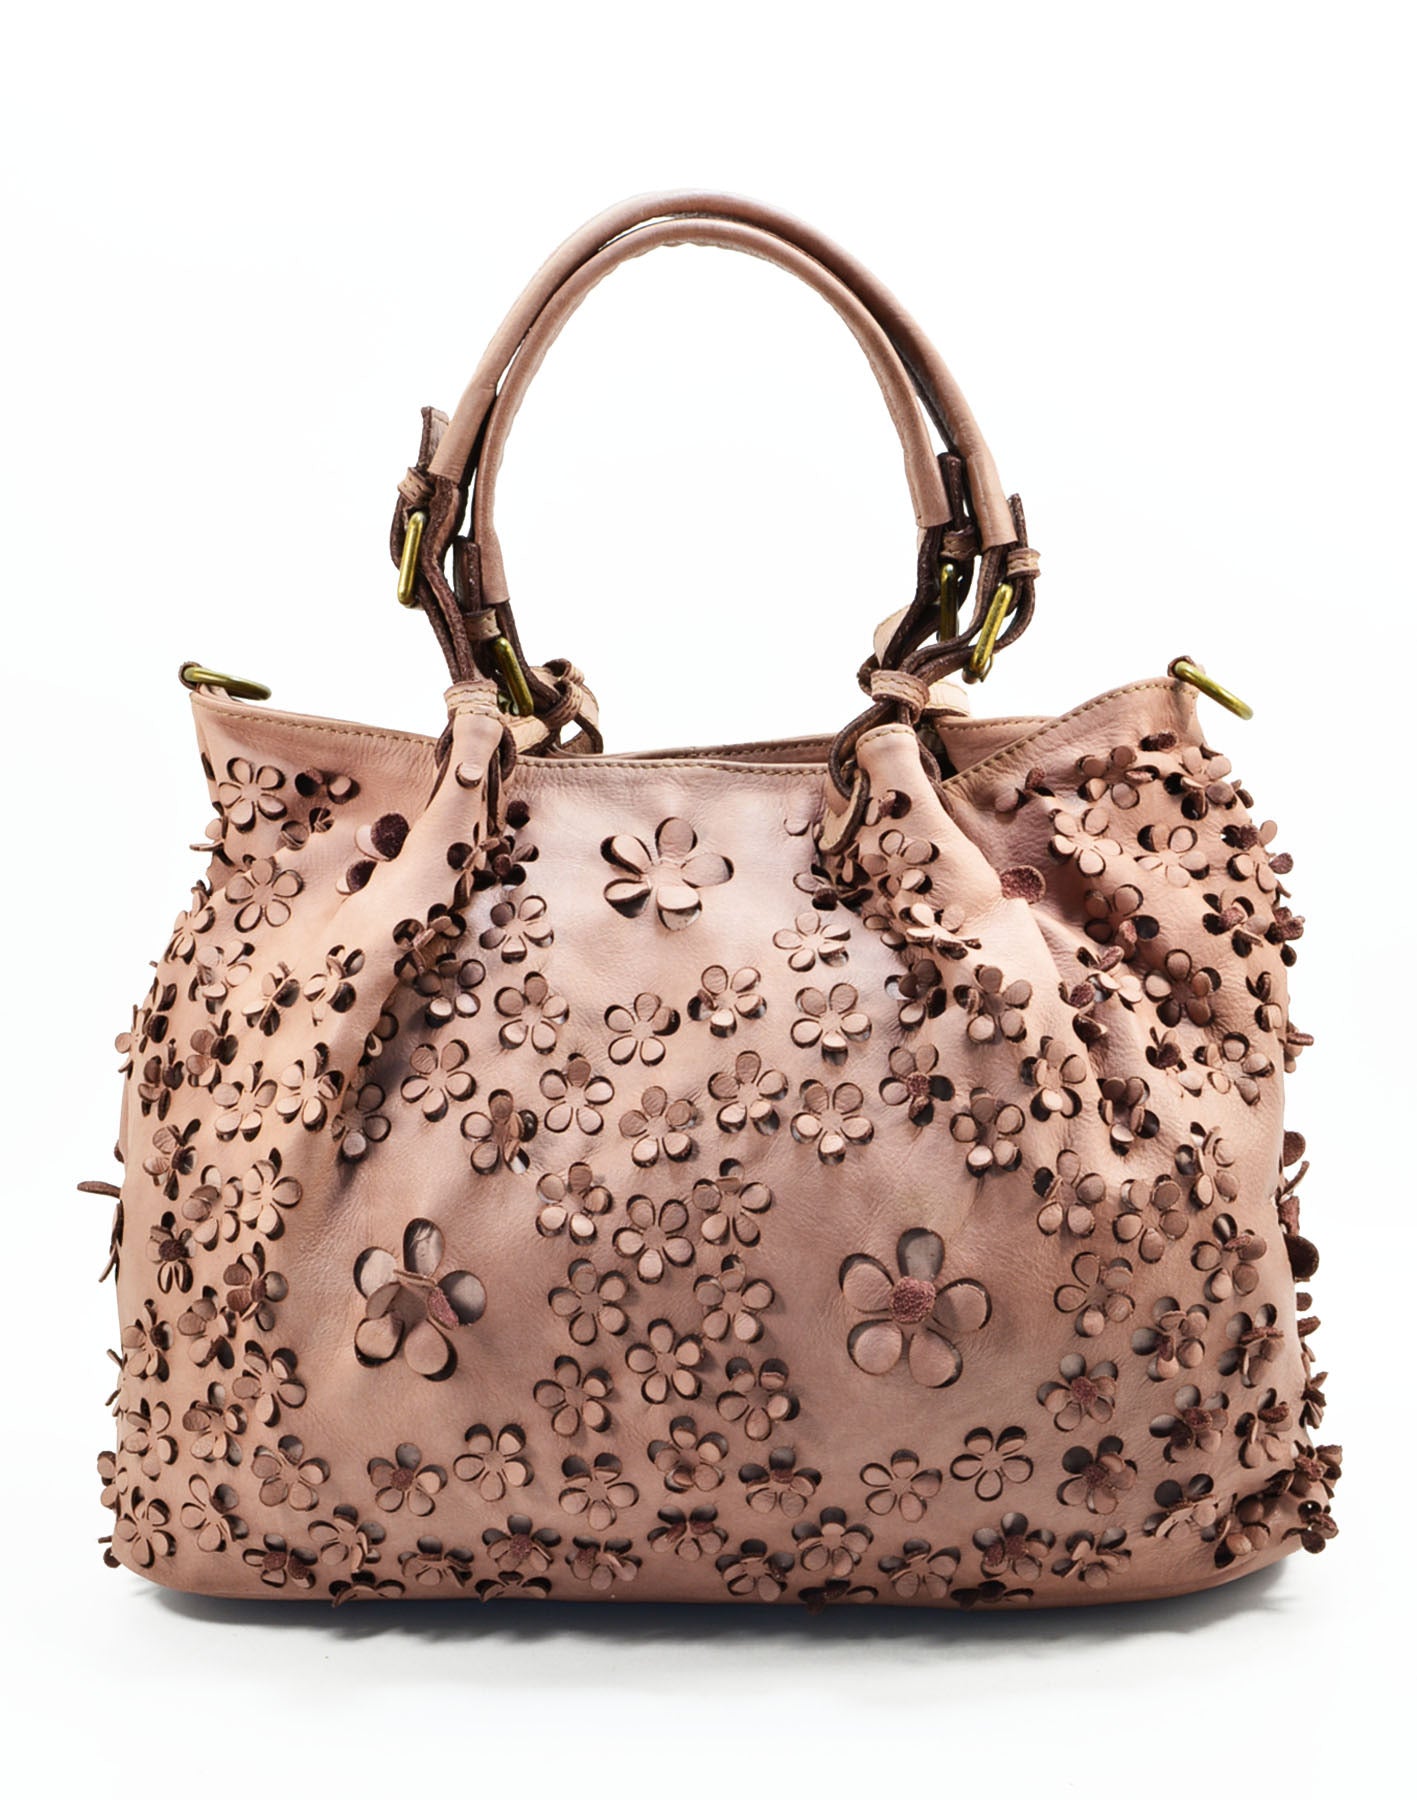 FIORINO● Leather bag handbag for women made of Italian leather with floral pattern